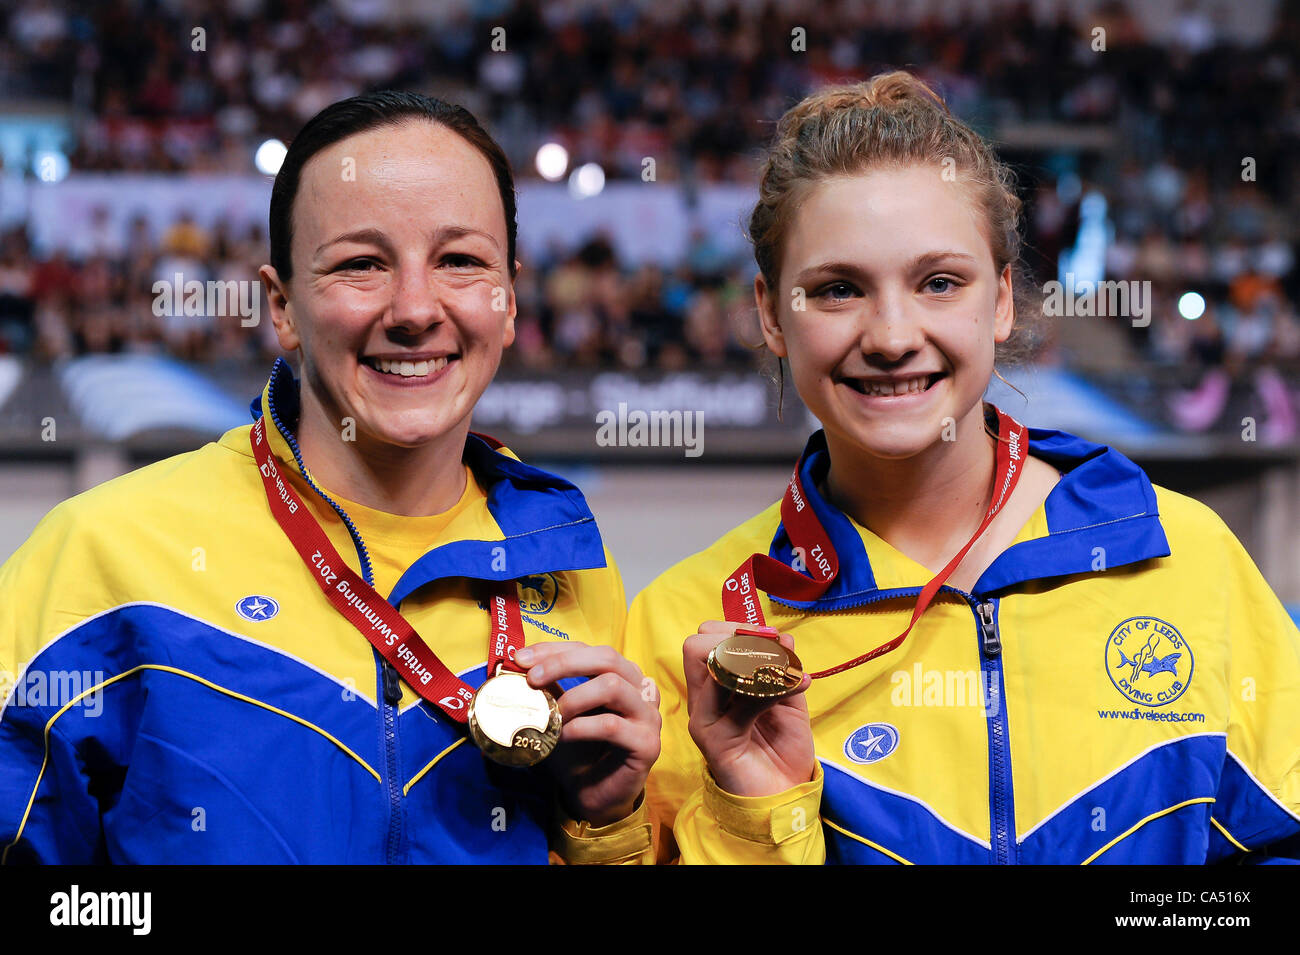 08.06.2012 Sheffield, England. Rebecca Gallantree and Alicia Blagg (City of Leeds Diving Club) pose with their Gold medals after winning the Womens 3m Synchro Springboard Final on Day 1 of the 2012 British Gas Diving Championships (and Team GB Olympic Squad Selection Trials) at Ponds Forge Internati Stock Photo